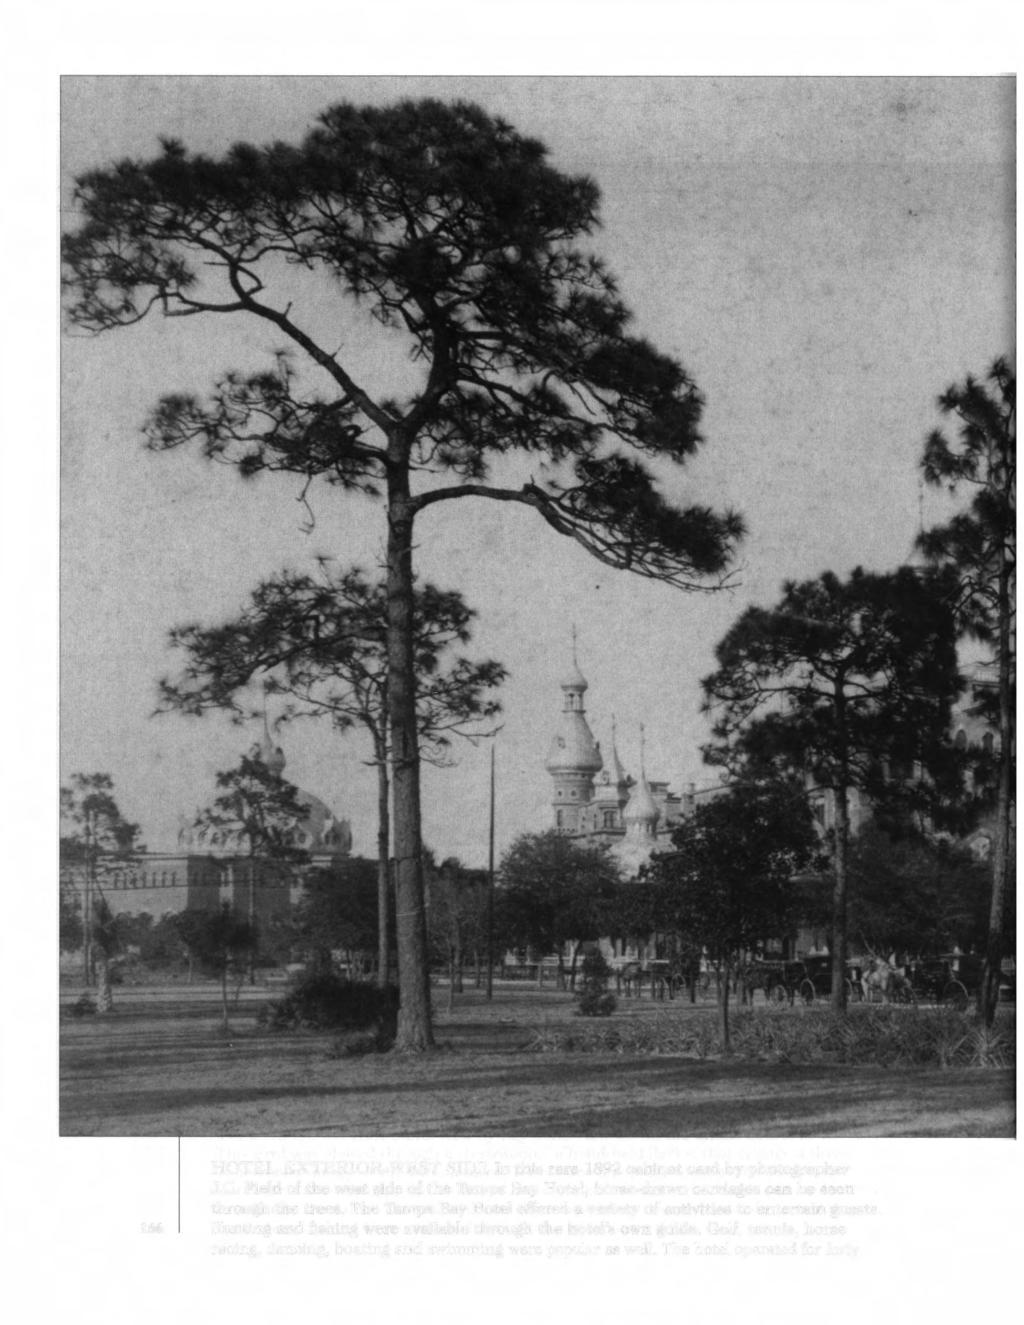 HOTEL EXTERIOR-WEST SIDE In this rare 1892 cabinet card by photographer J.C. Field of the west side of the Tampa Bay Hotel, horse-drawn carriages can be seen through the trees.